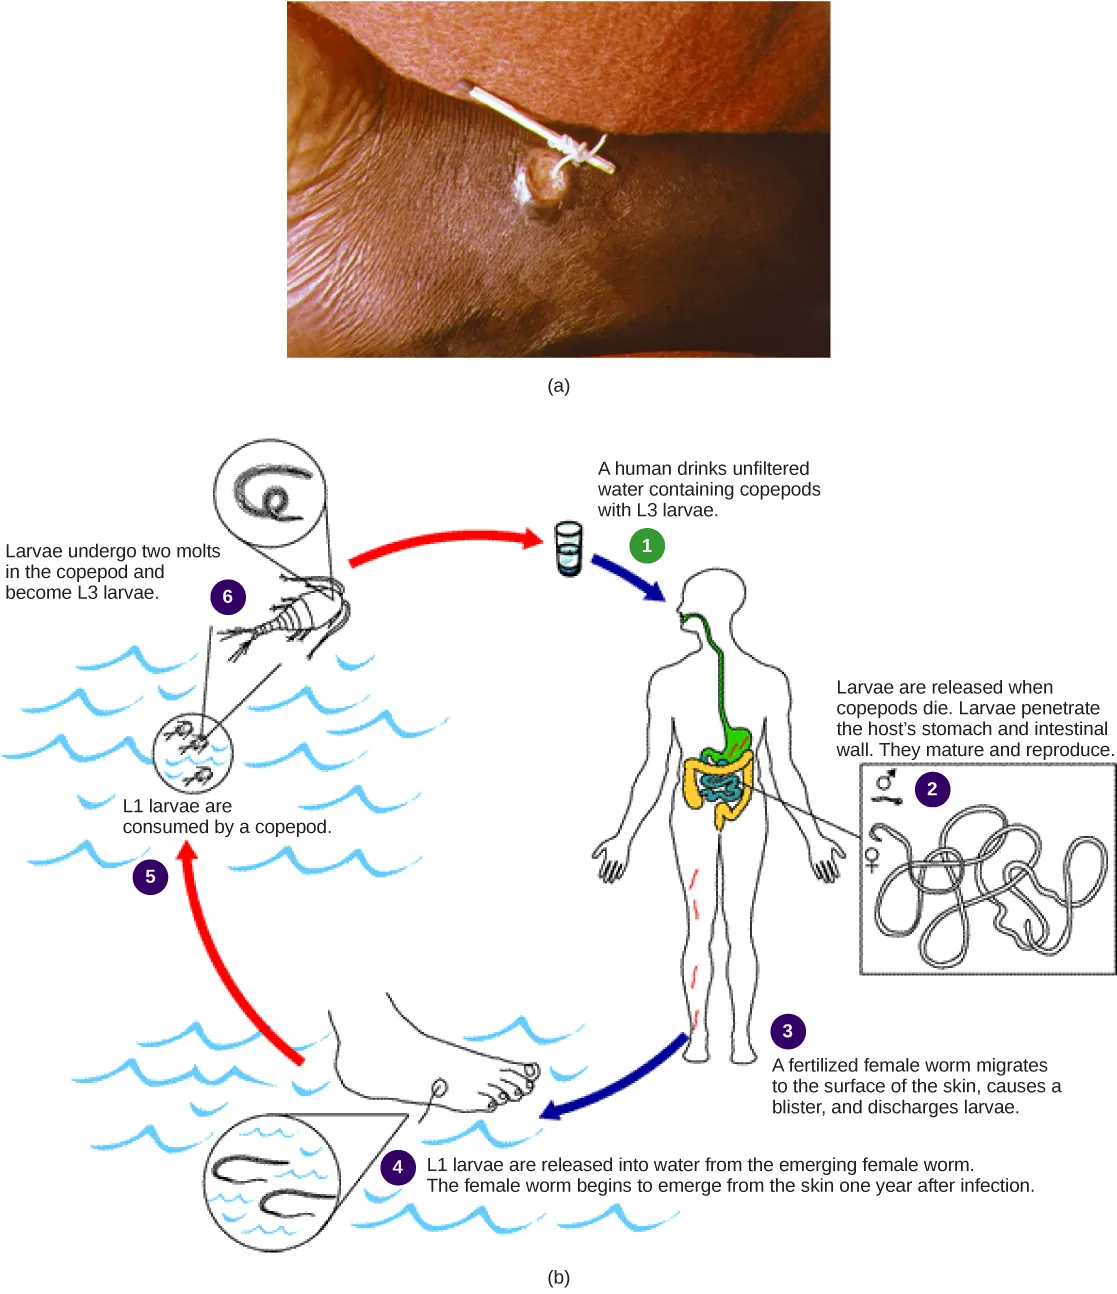  Part A shows a foot with a guinea worm extending from a blister. The end of the worm is wrapped around a stick. Part B shows the life cycle of the guinea worm, which begins when a person drinks unfiltered water containing copepods infected with guinea worm larvae. Larvae, which are released when the copepods die, penetrate the wall of the stomach and intestine. The worms mature and reproduce. Fertilized females migrate to the surface of the skin, where they discharge larvae into the water. Copepods consume the larvae. The copepods are consumed by humans, completing the cycle. About a year after infection, the female worm emerges from the skin.